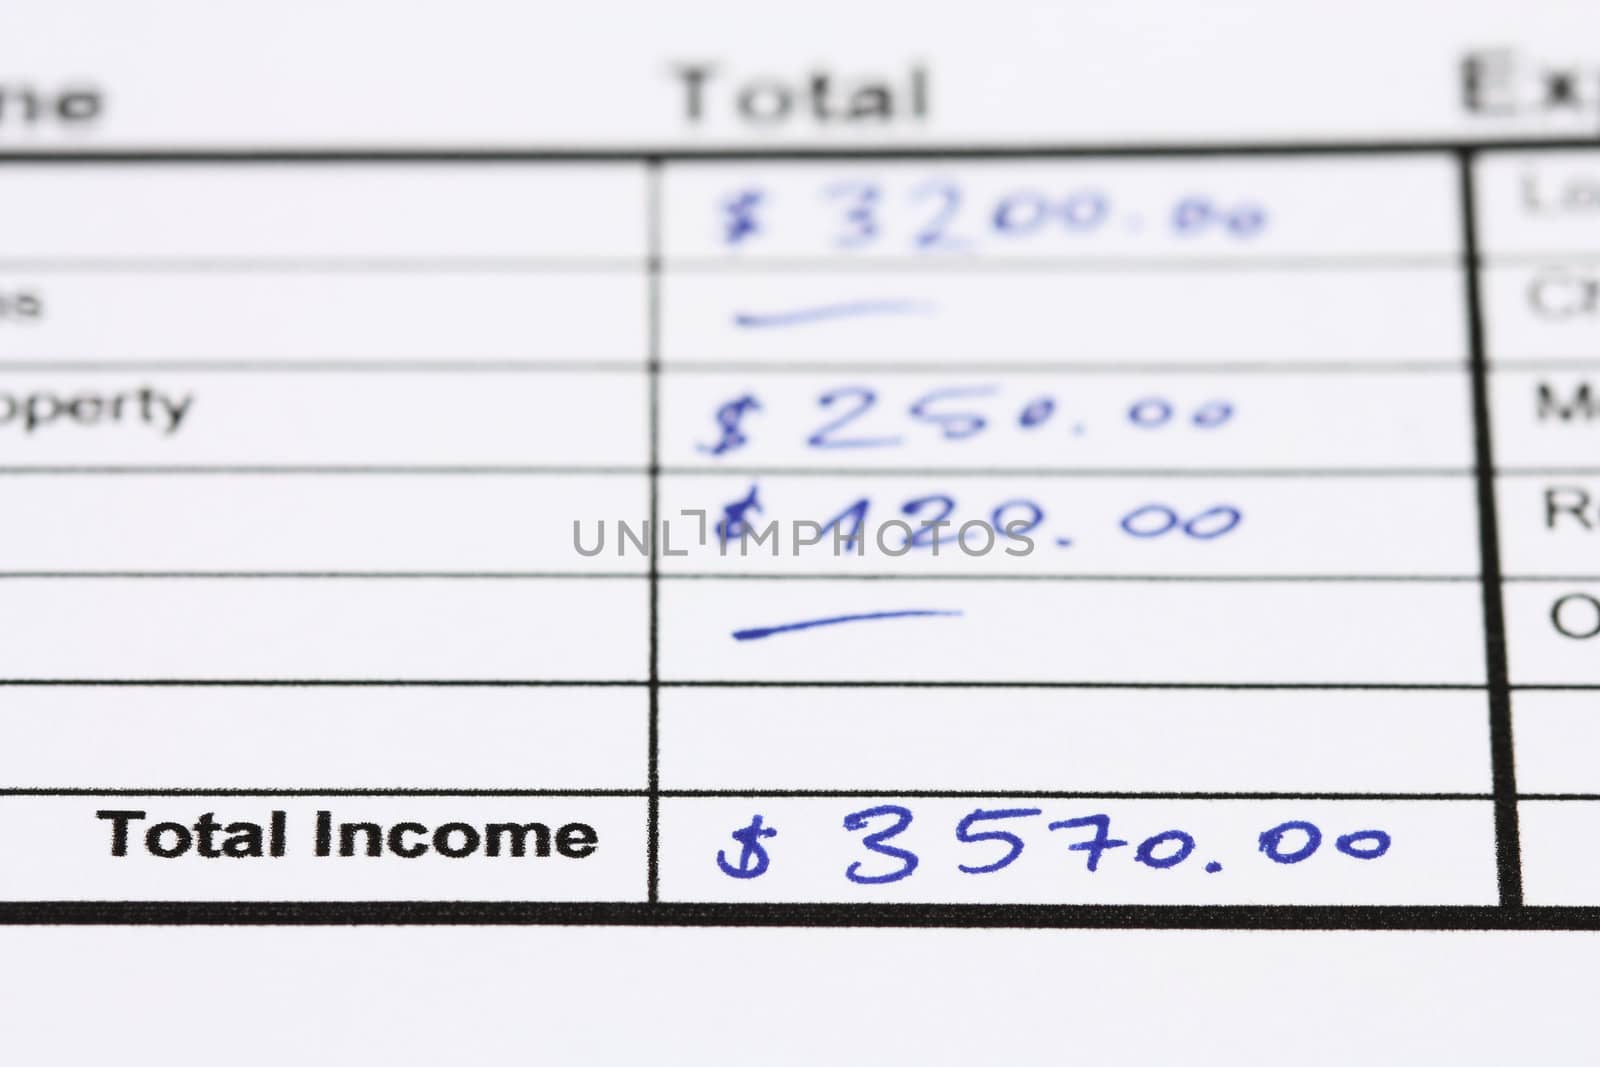 Consumer credit application - total income written in a table with blue ink. Shallow depth of field.